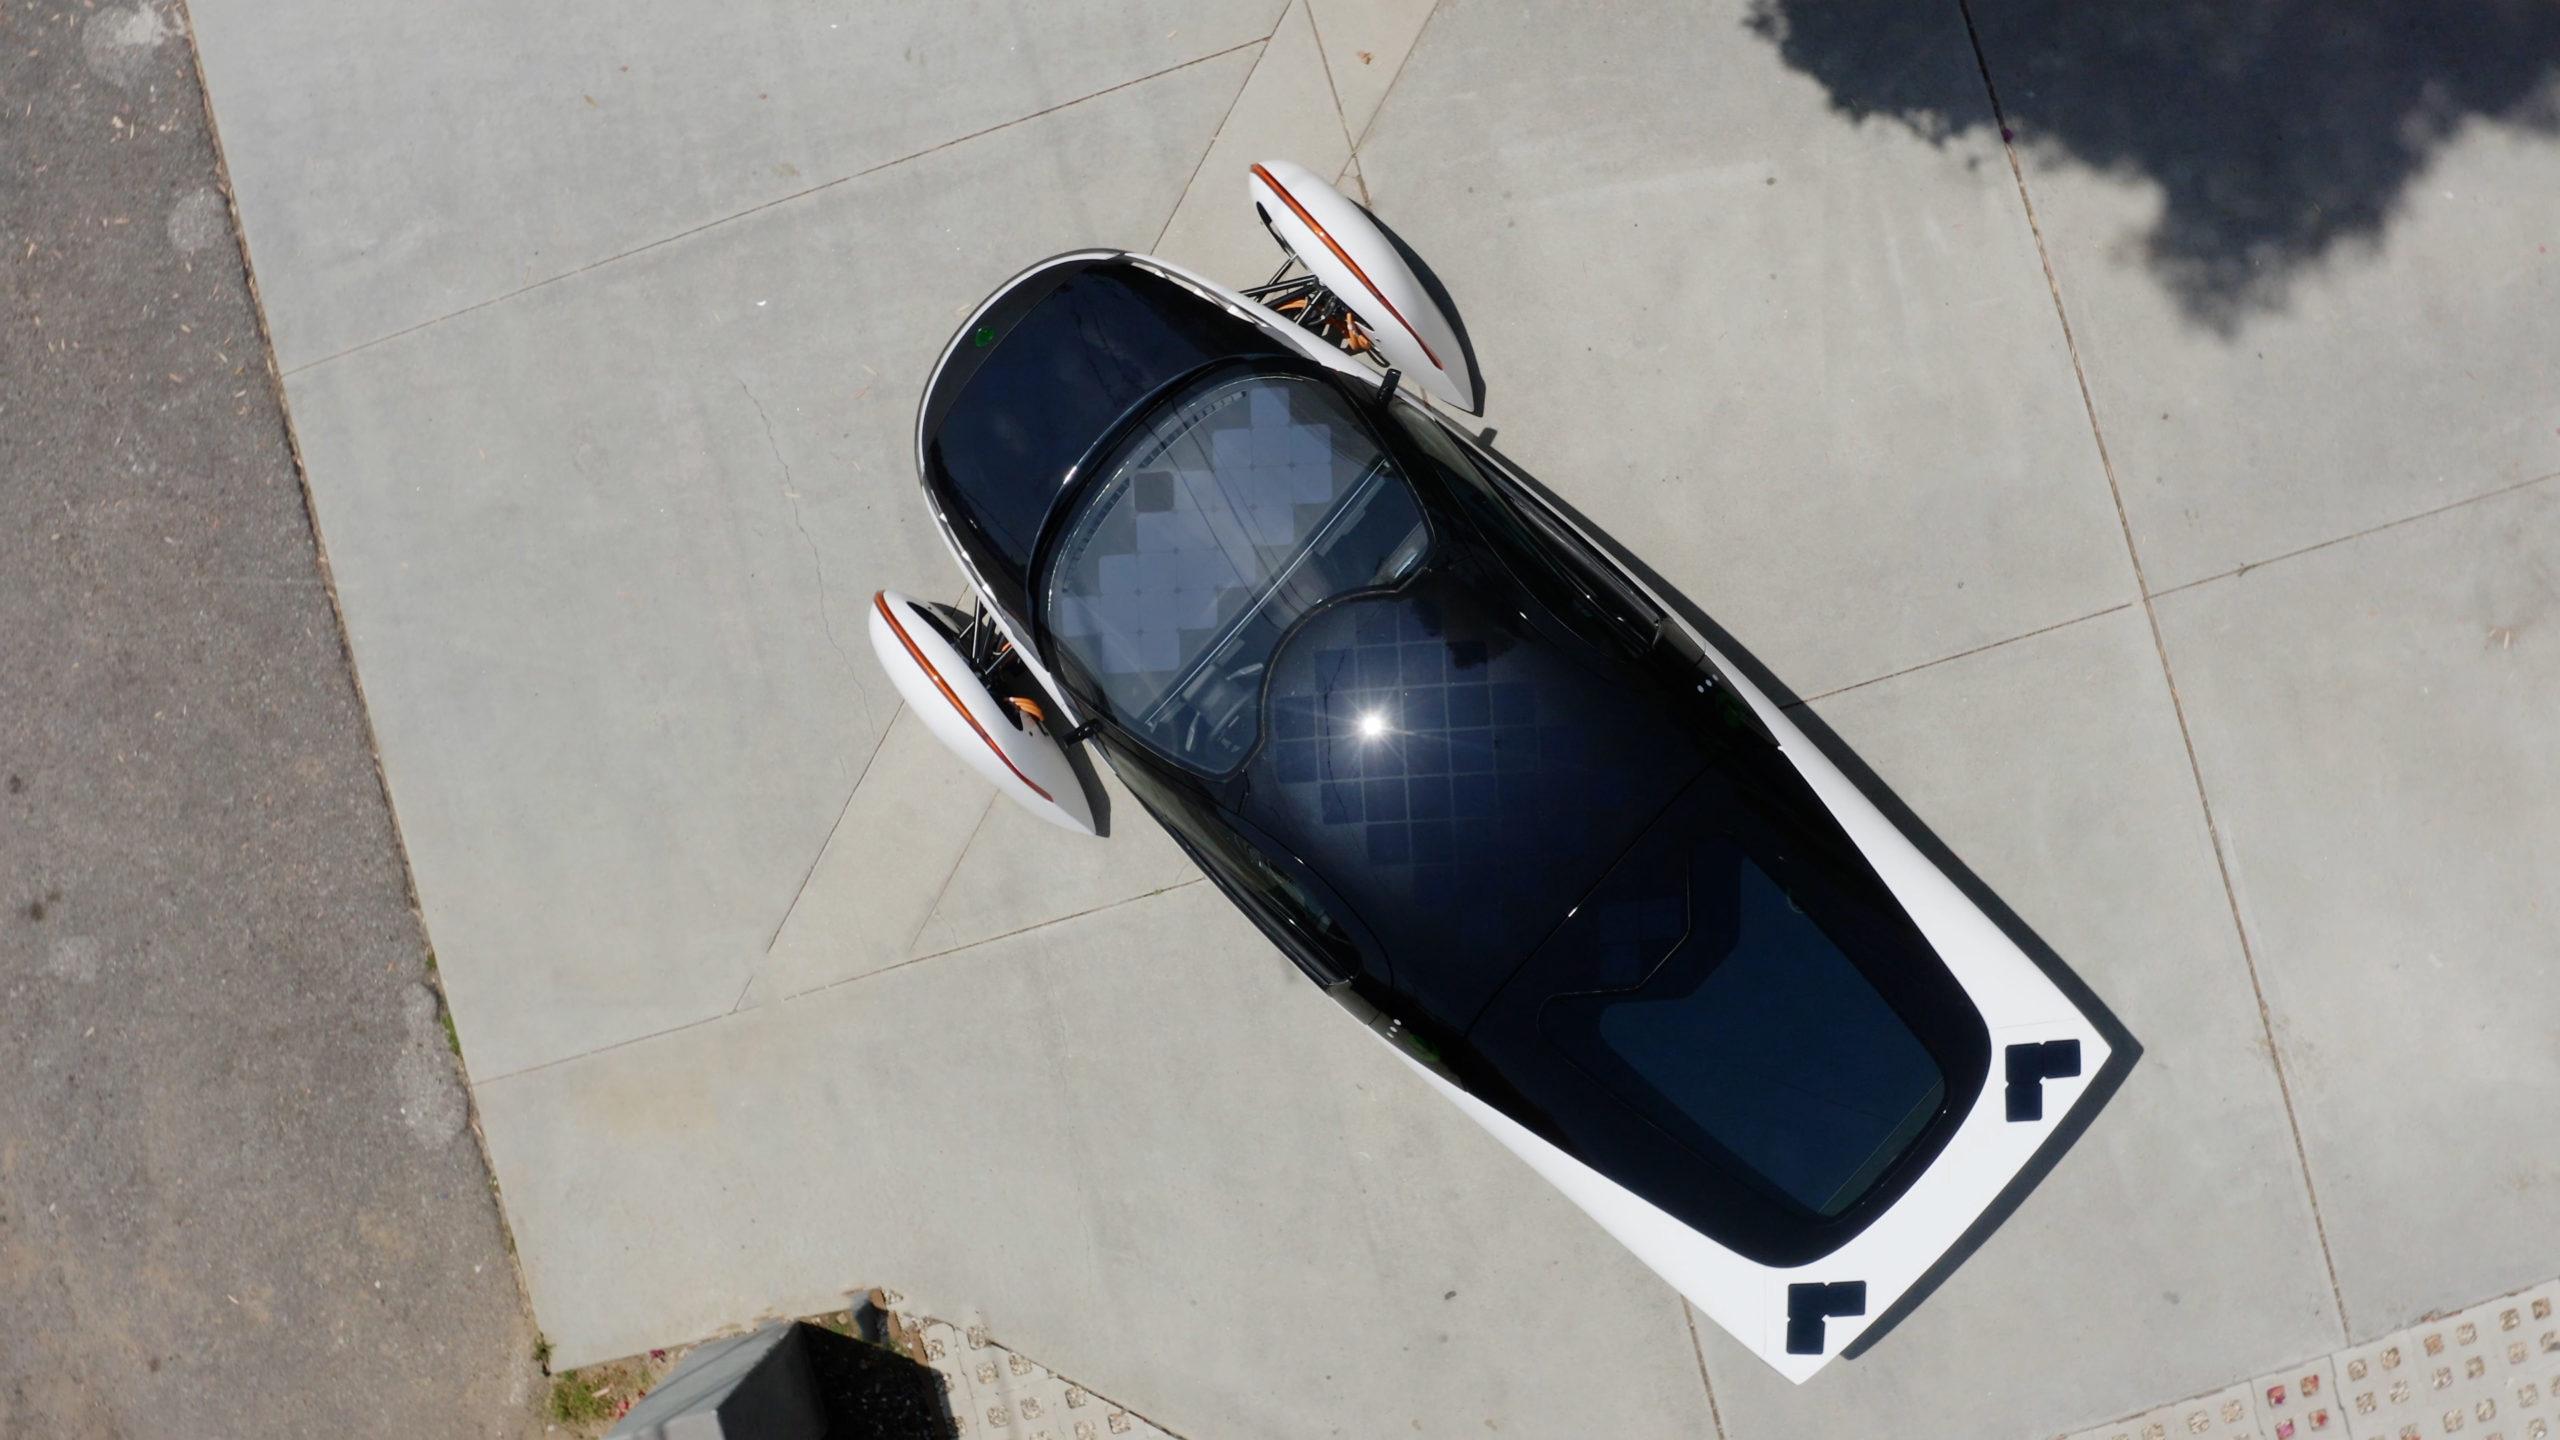 With built-in solar panels, the car promises an autonomy of 64 kilometers per day (Source: Aptera/description)